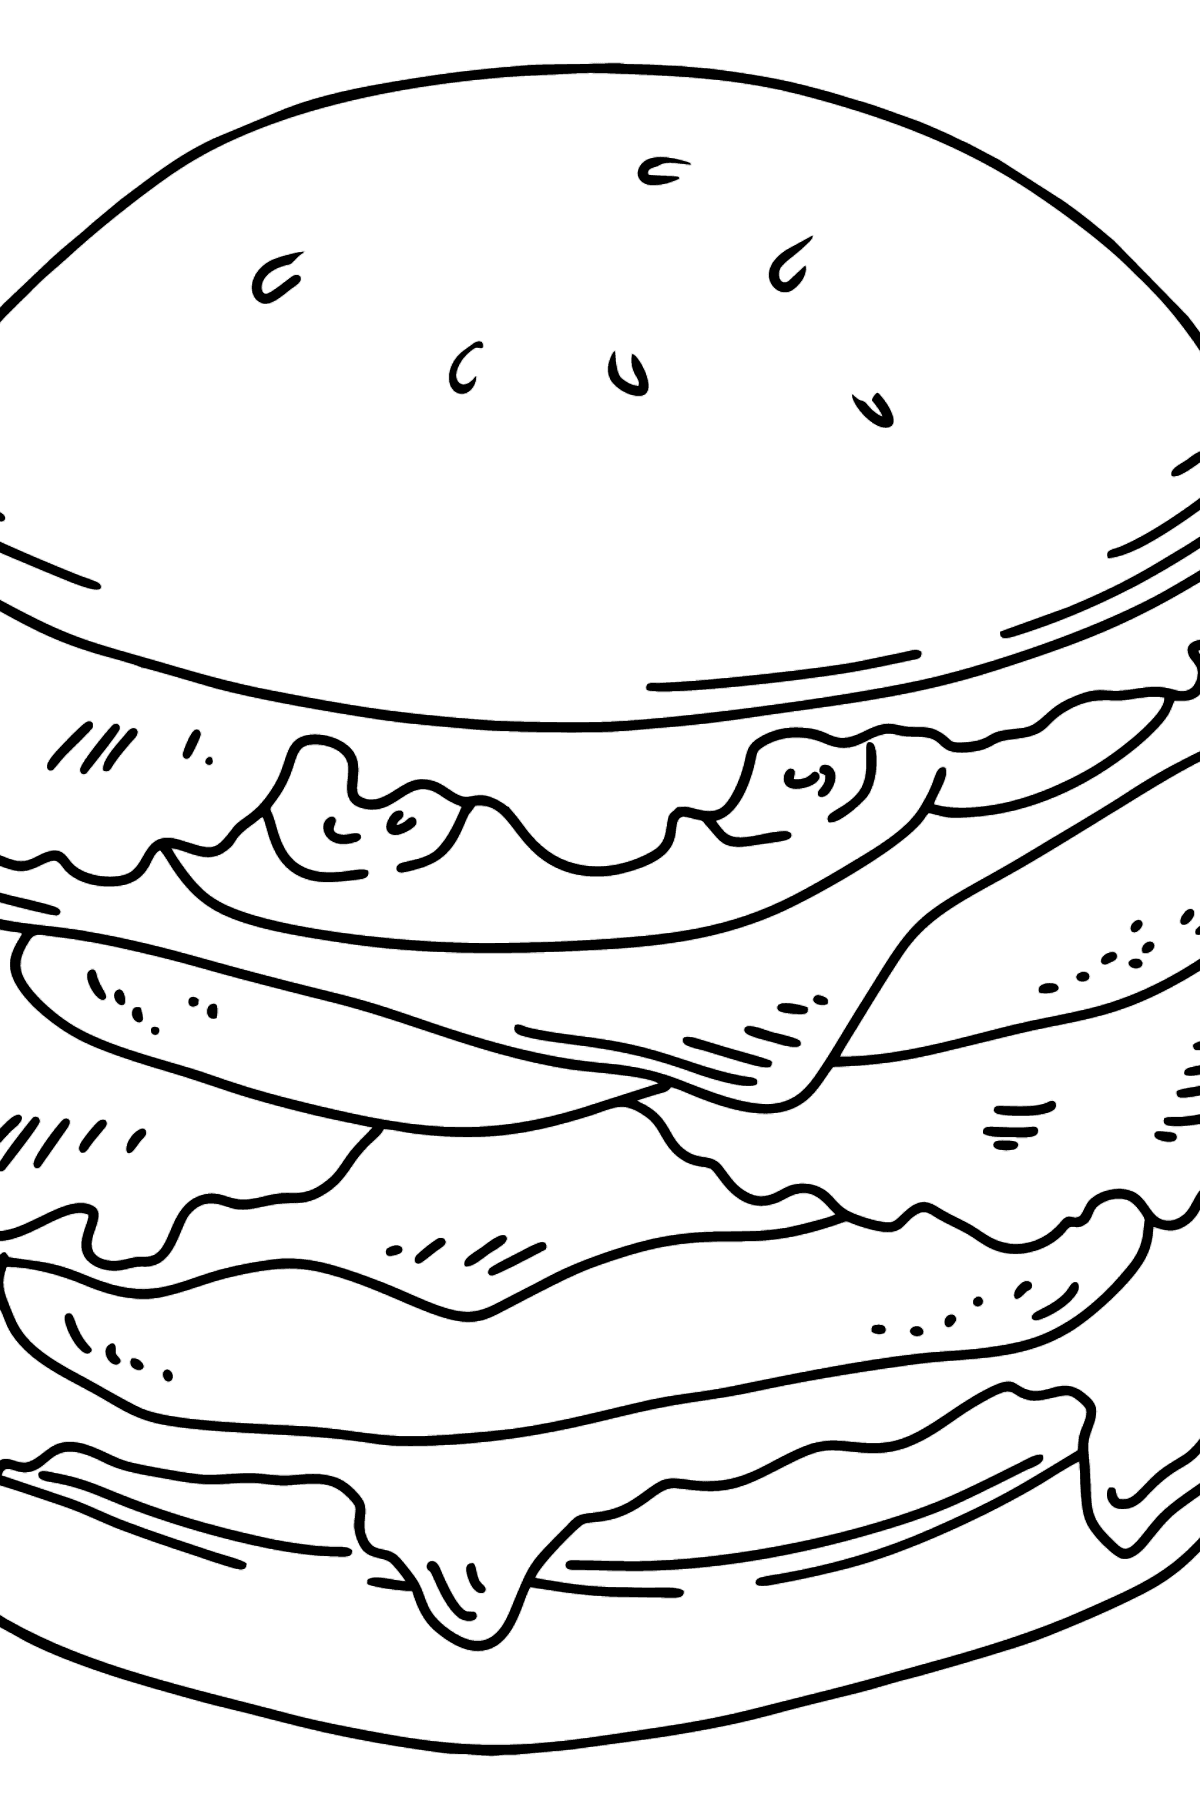 Juicy Burger coloring page - Coloring Pages for Kids